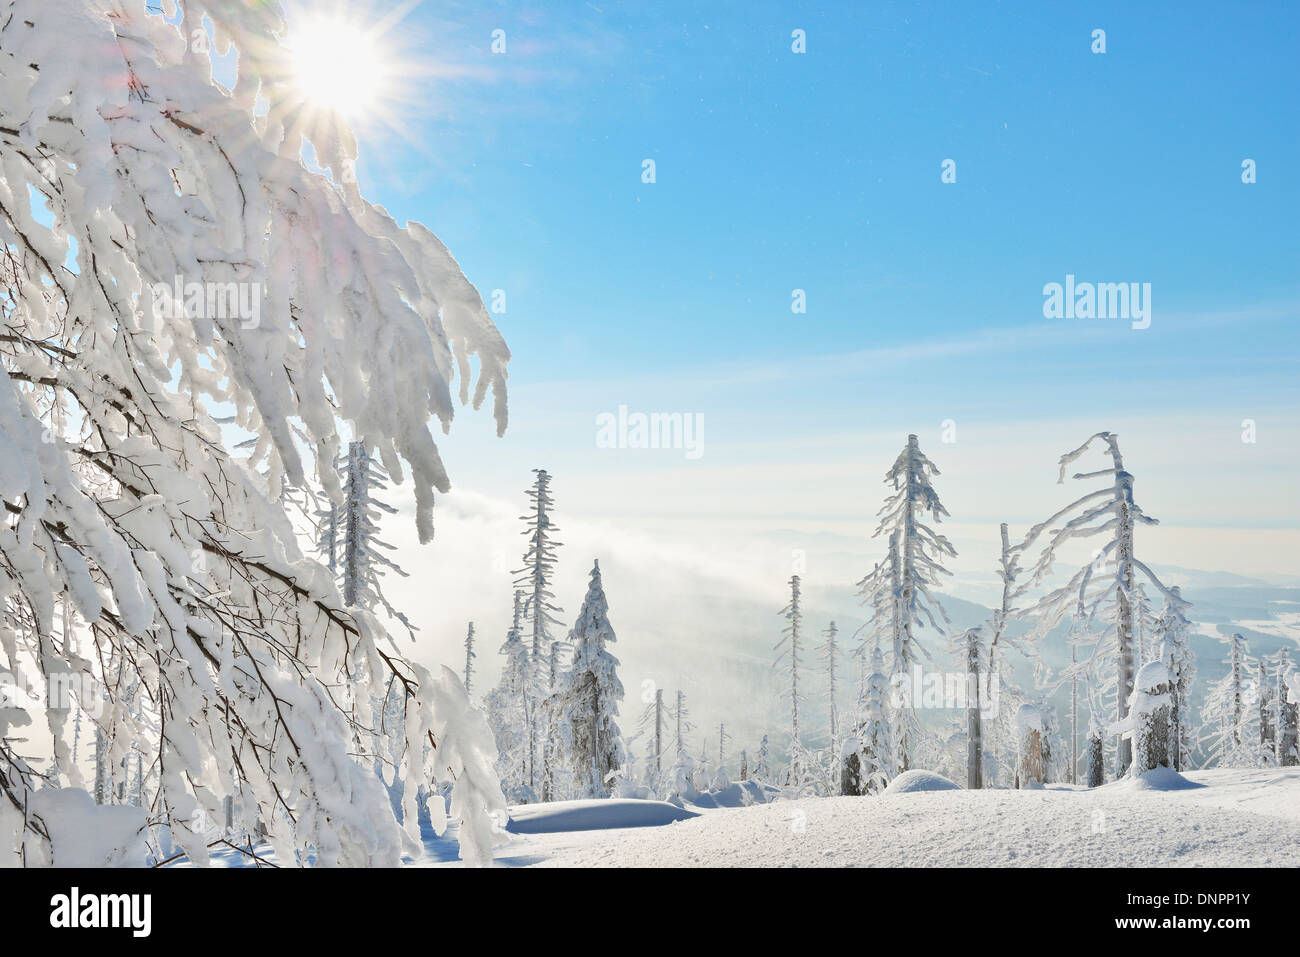 Snow Covered Conifer Forest with Sun, Winter, Grafenau, Lusen, National Park Bavarian Forest, Bavaria, Germany Stock Photo